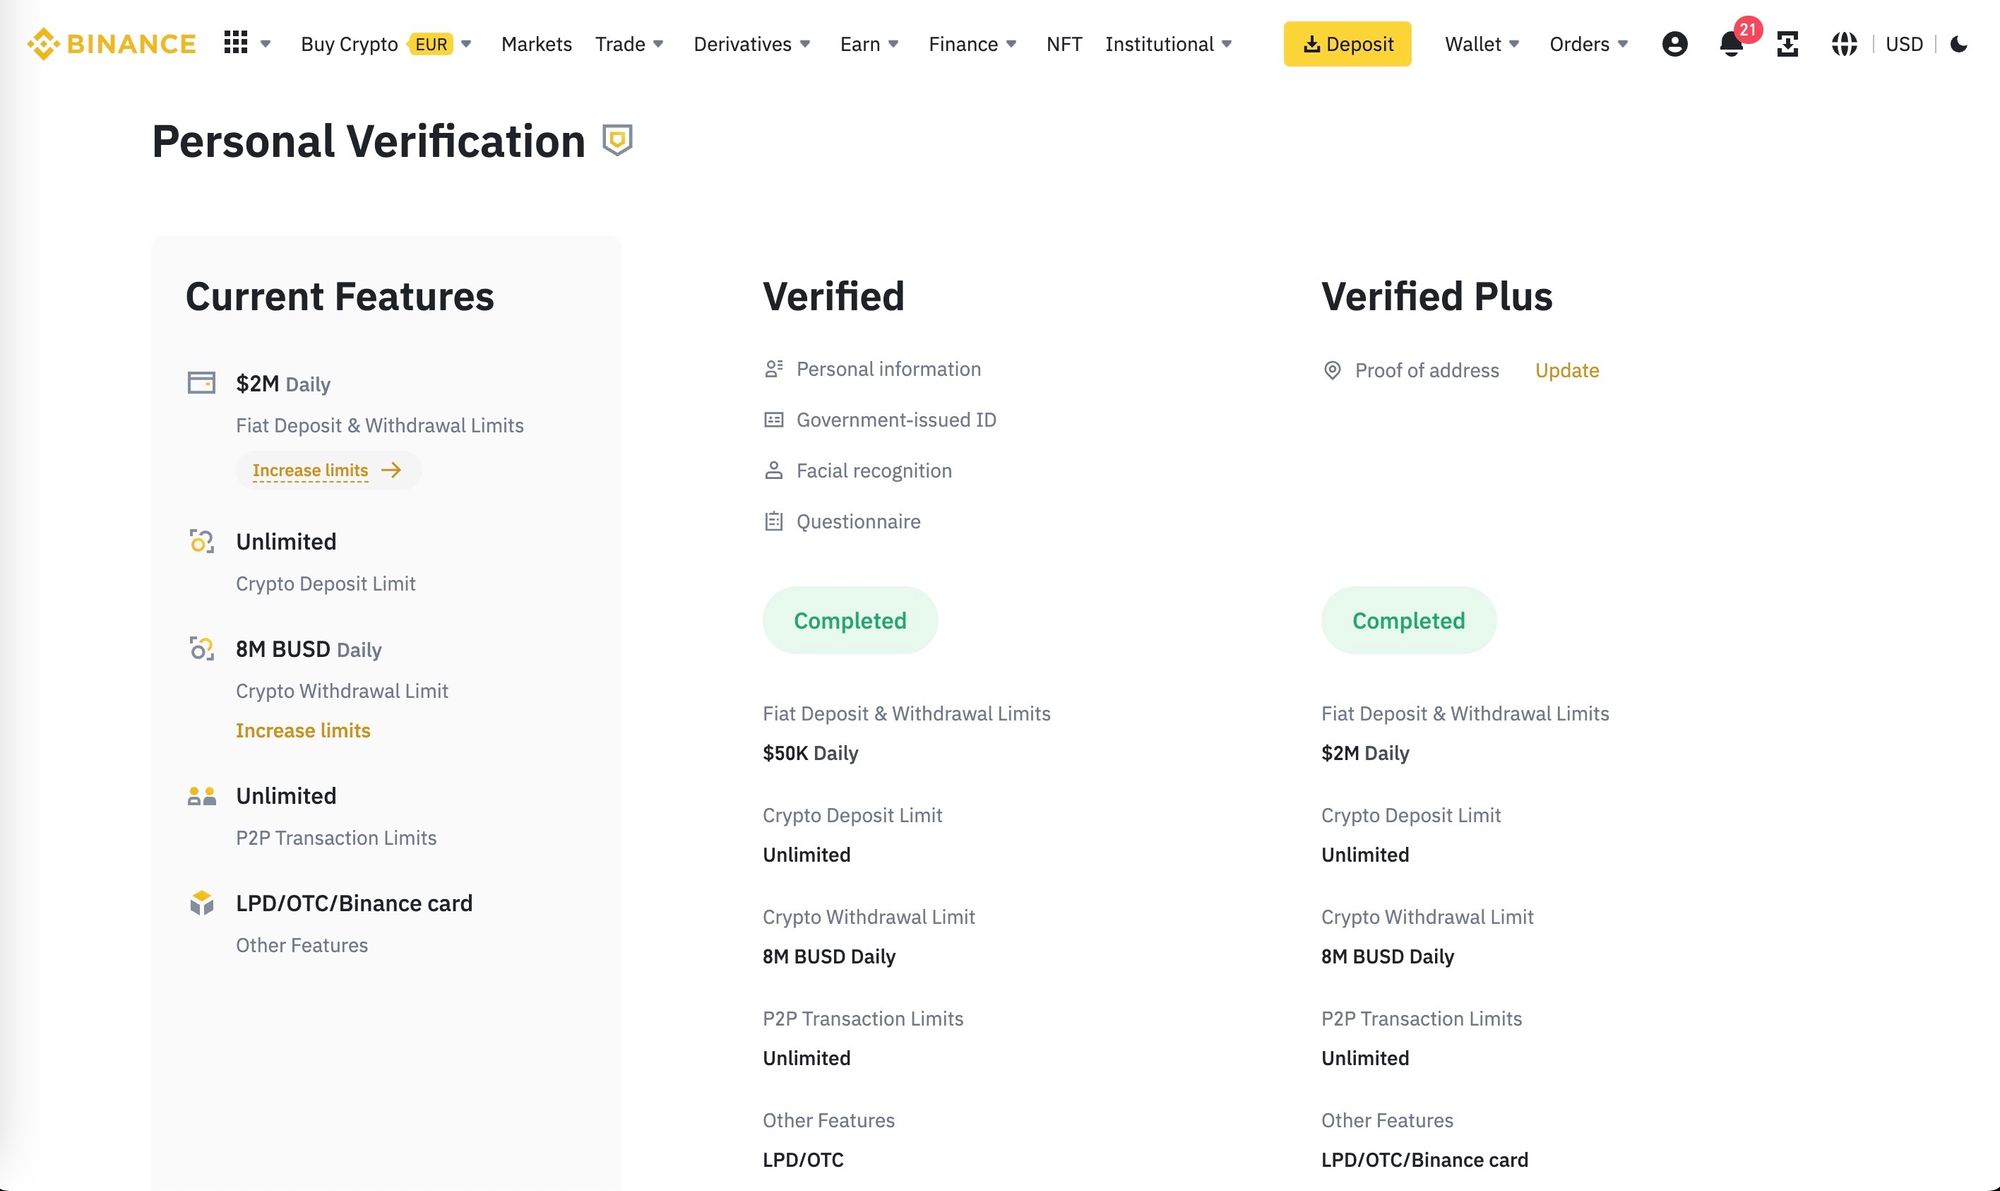 KYC: the identification page on the Binance exchange